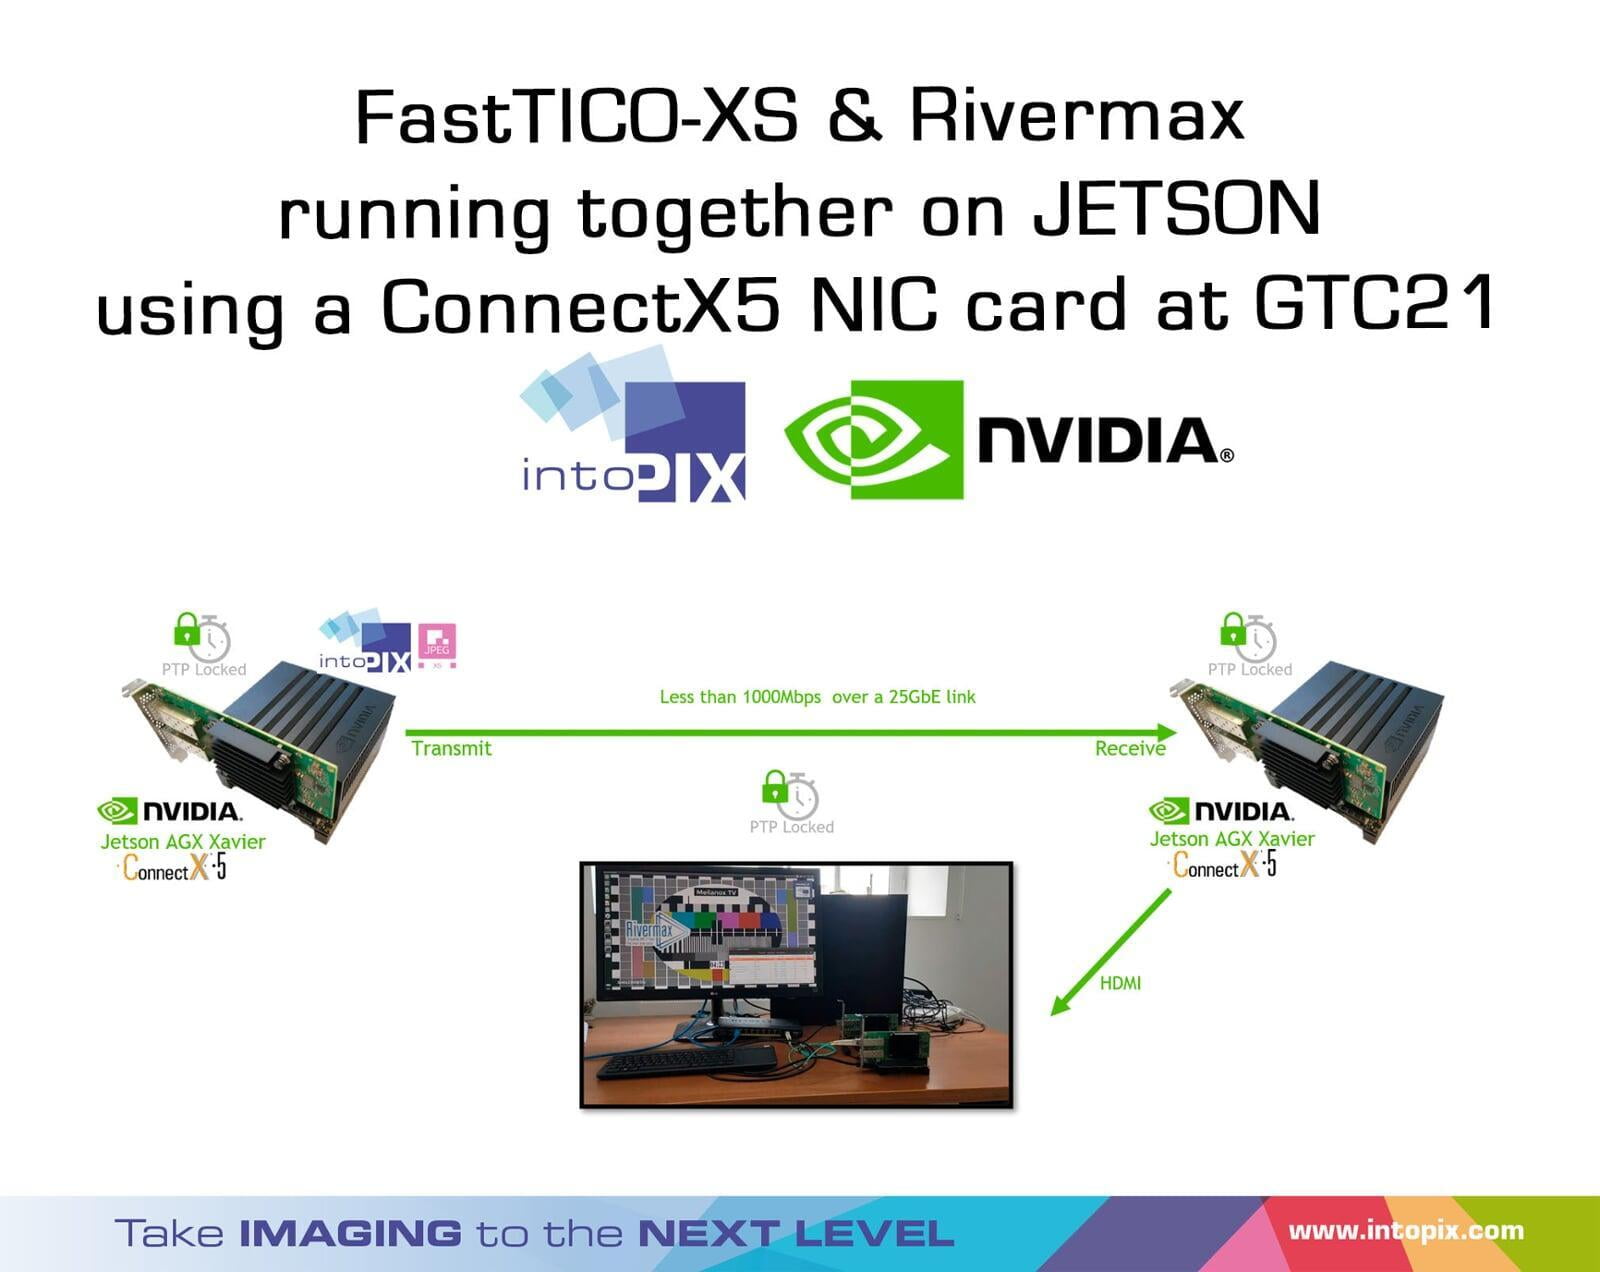 FastTicoXS  & Rivermax running together on JETSON using a ConnectX5 NIC card at GTC21